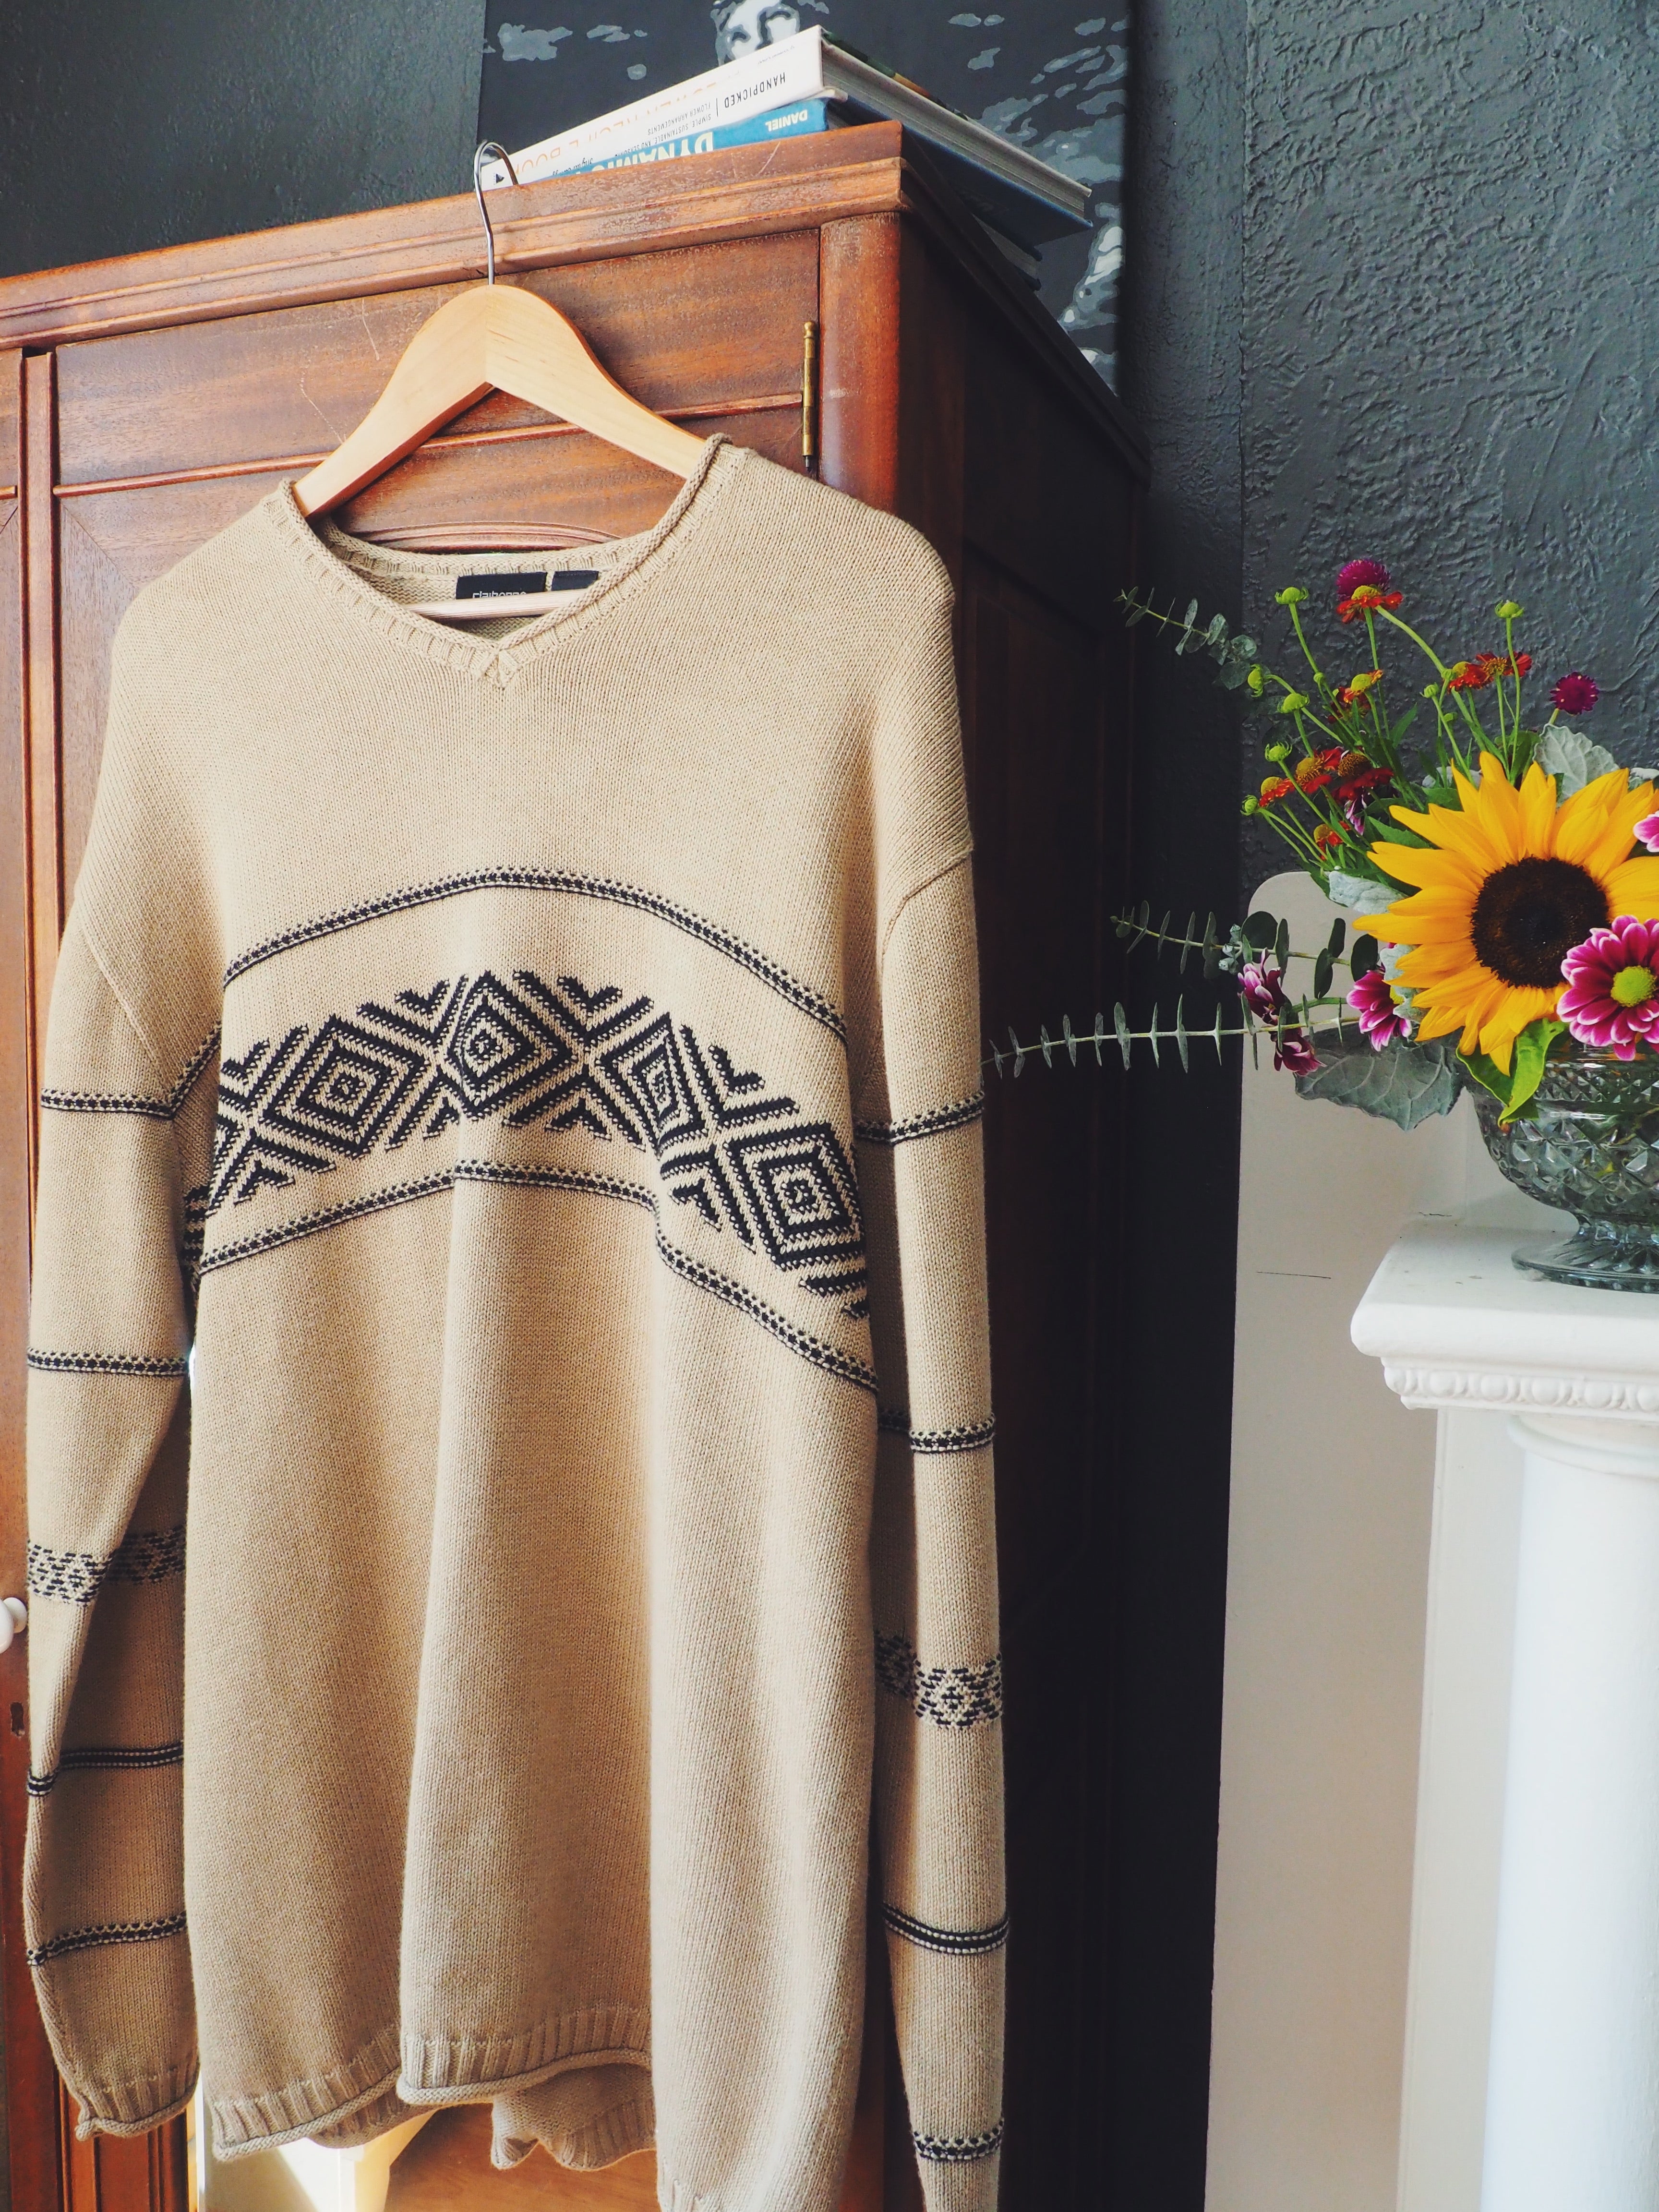 90's Graphic Over-sized Men's Sweater